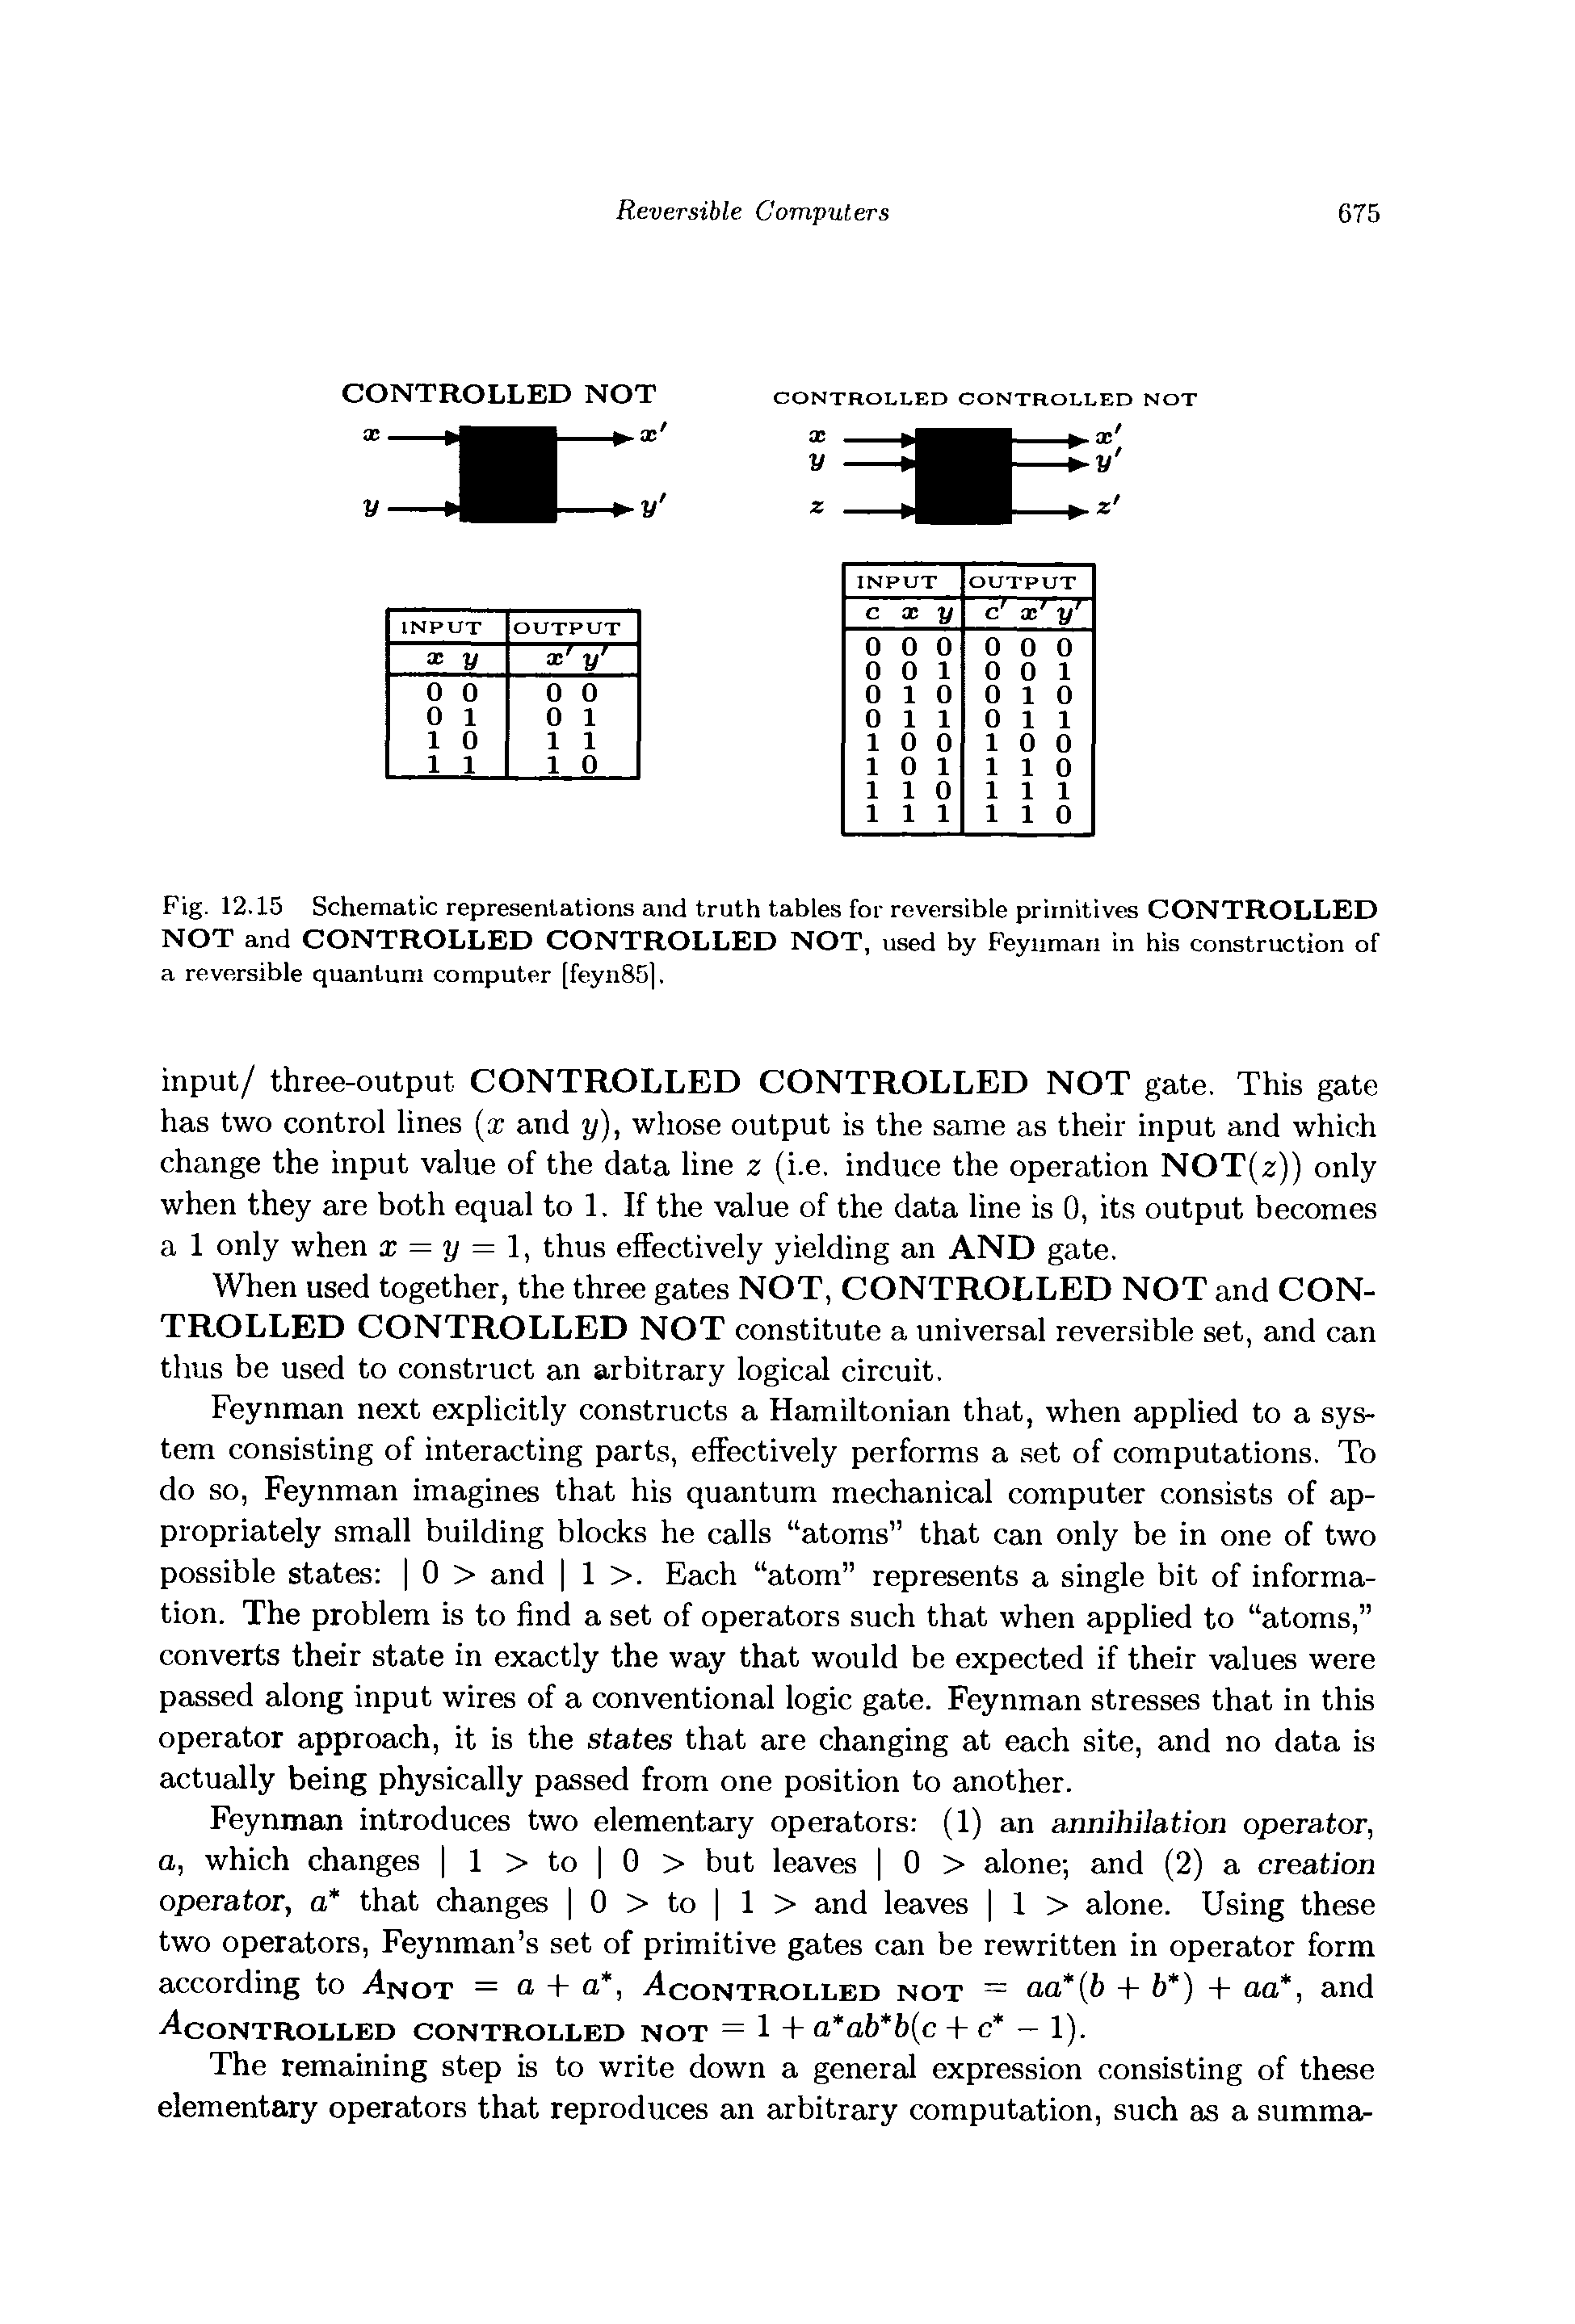 Fig. 12.15 Schematic representations and truth tables for reversible primitives CONTROLLED NOT and CONTROLLED CONTROLLED NOT, used by Feynman in his construction of a reversible quantum computer [feyii85. ...